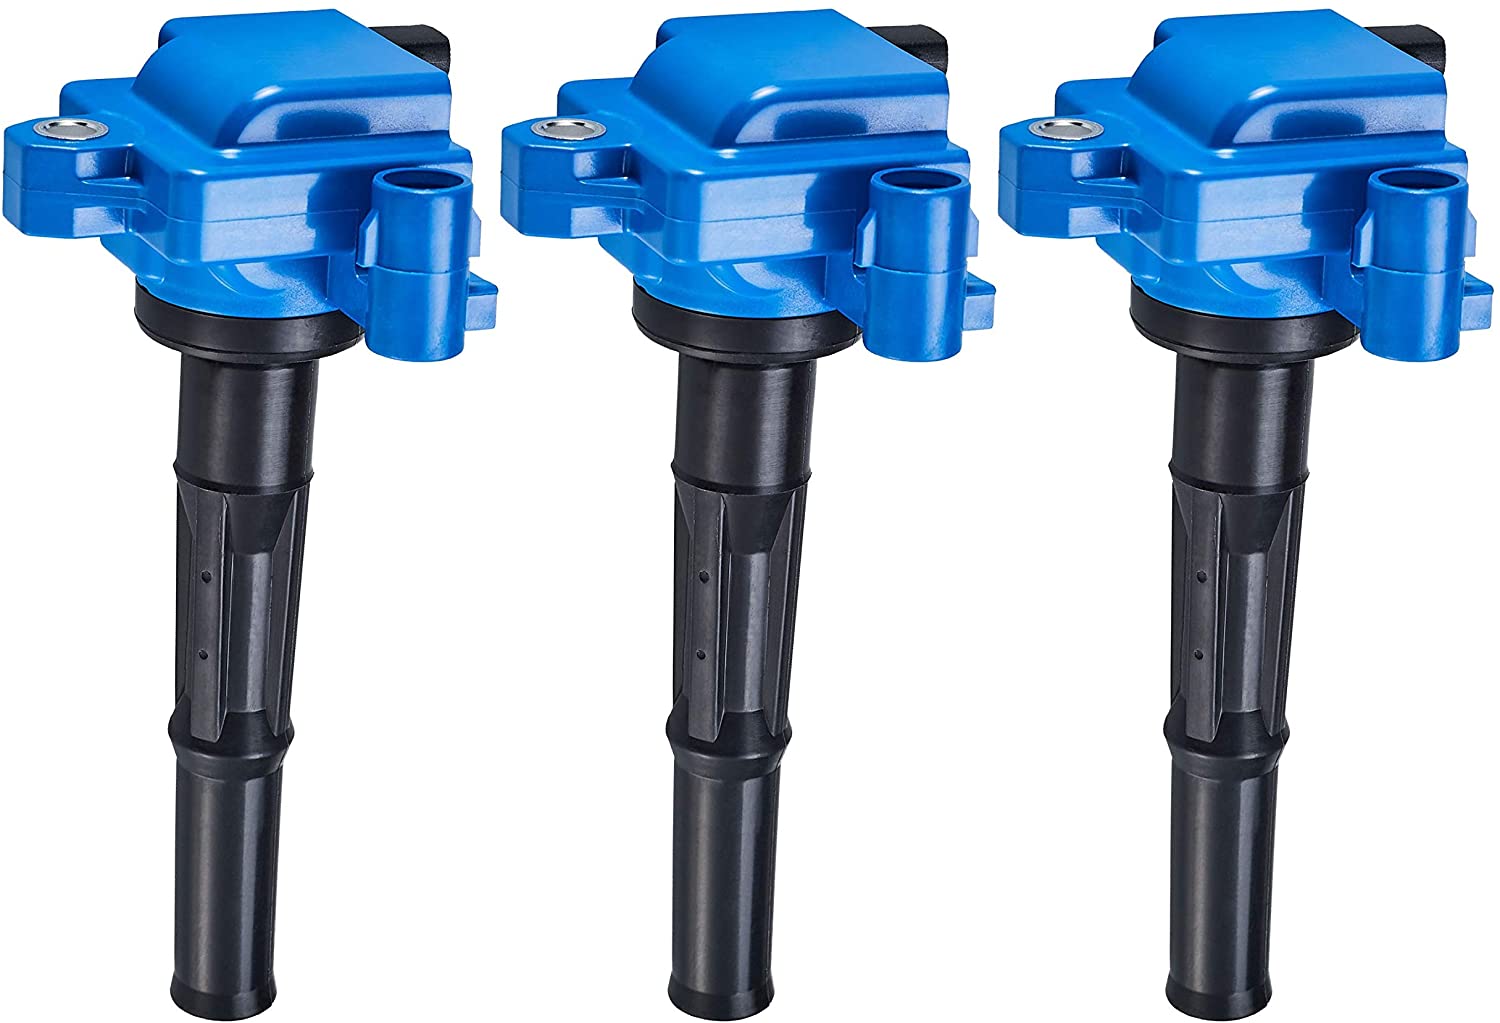 ENA Pack of 3 High Performance Ignition Coil compatible with 1996-02 Toyota 4Runner,1995-1998 Toyota T100,1995-2004 Toyota Tacoma, 2000-2004 Toyota Tundra V6 3.4L (3)